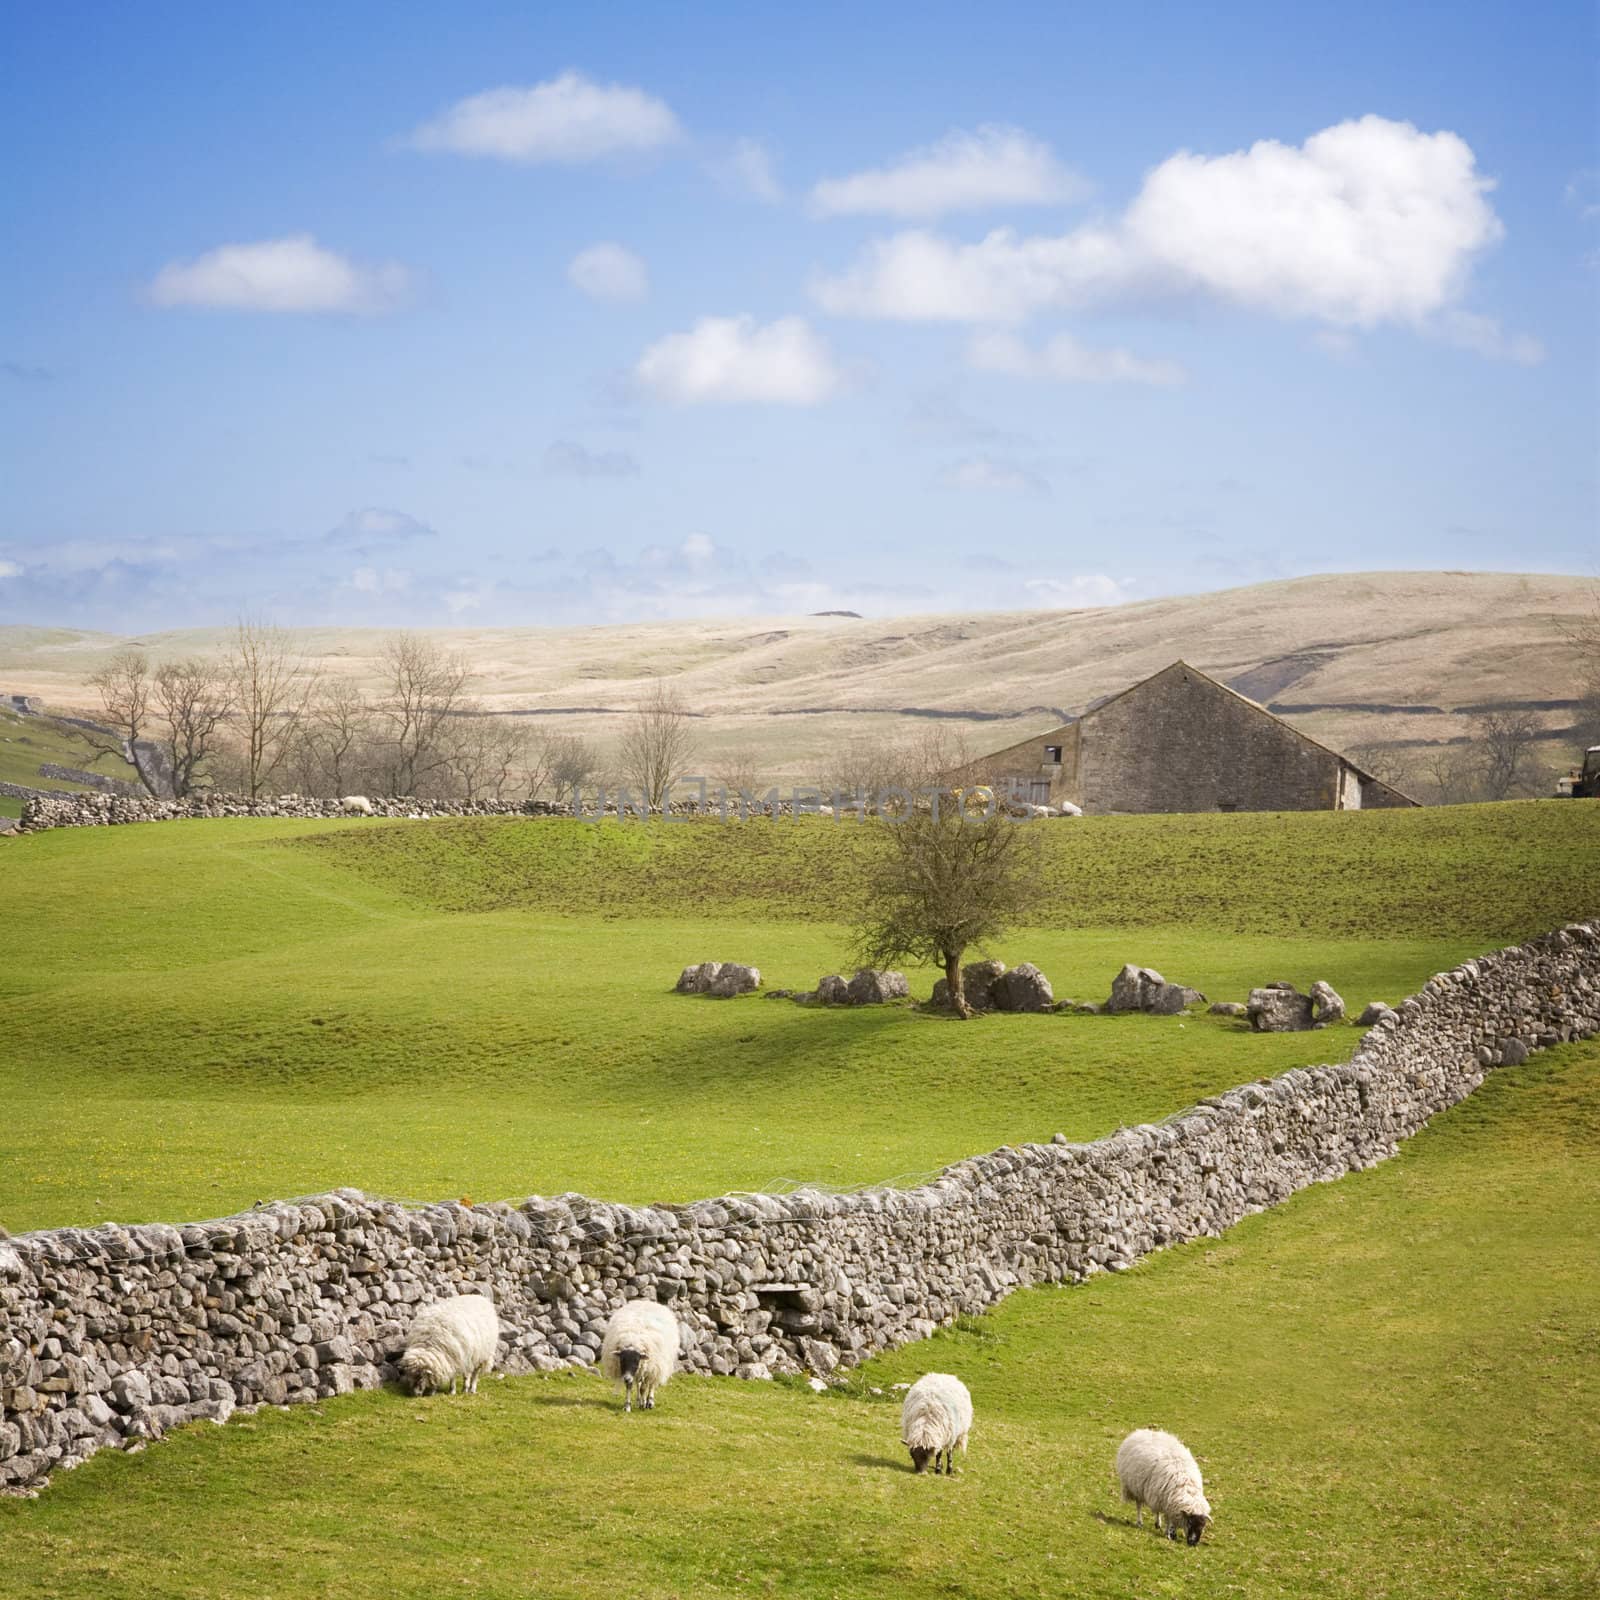 English Yorkshire Dales in early spring, with a dry stone wall and four sheep in a row.